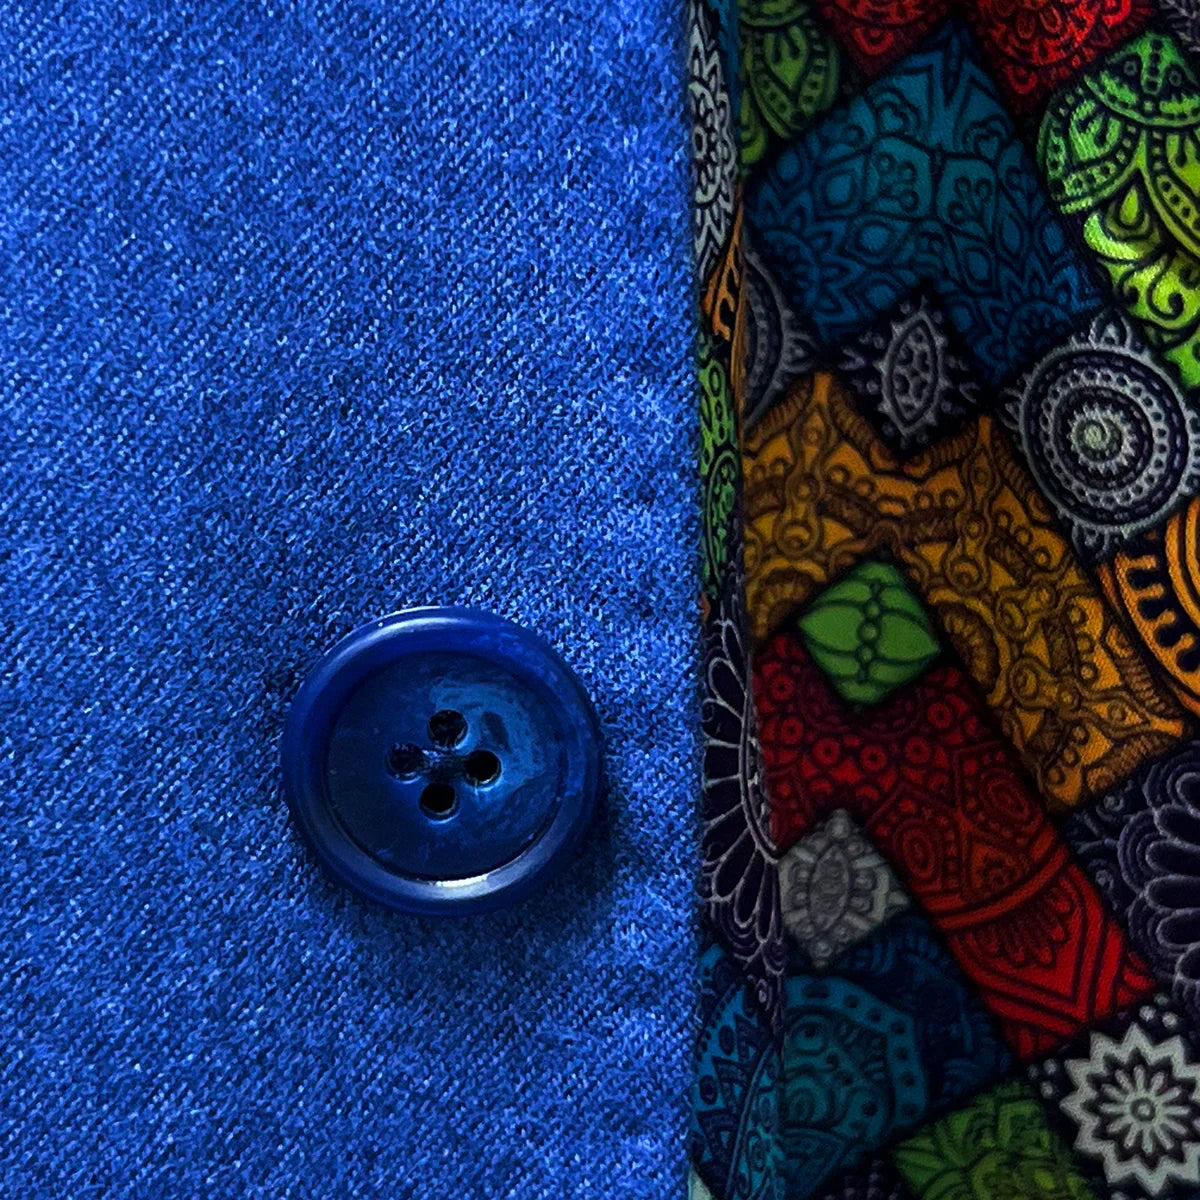 Horn marble buttons on a light blue flannel fall winter sportcoat.